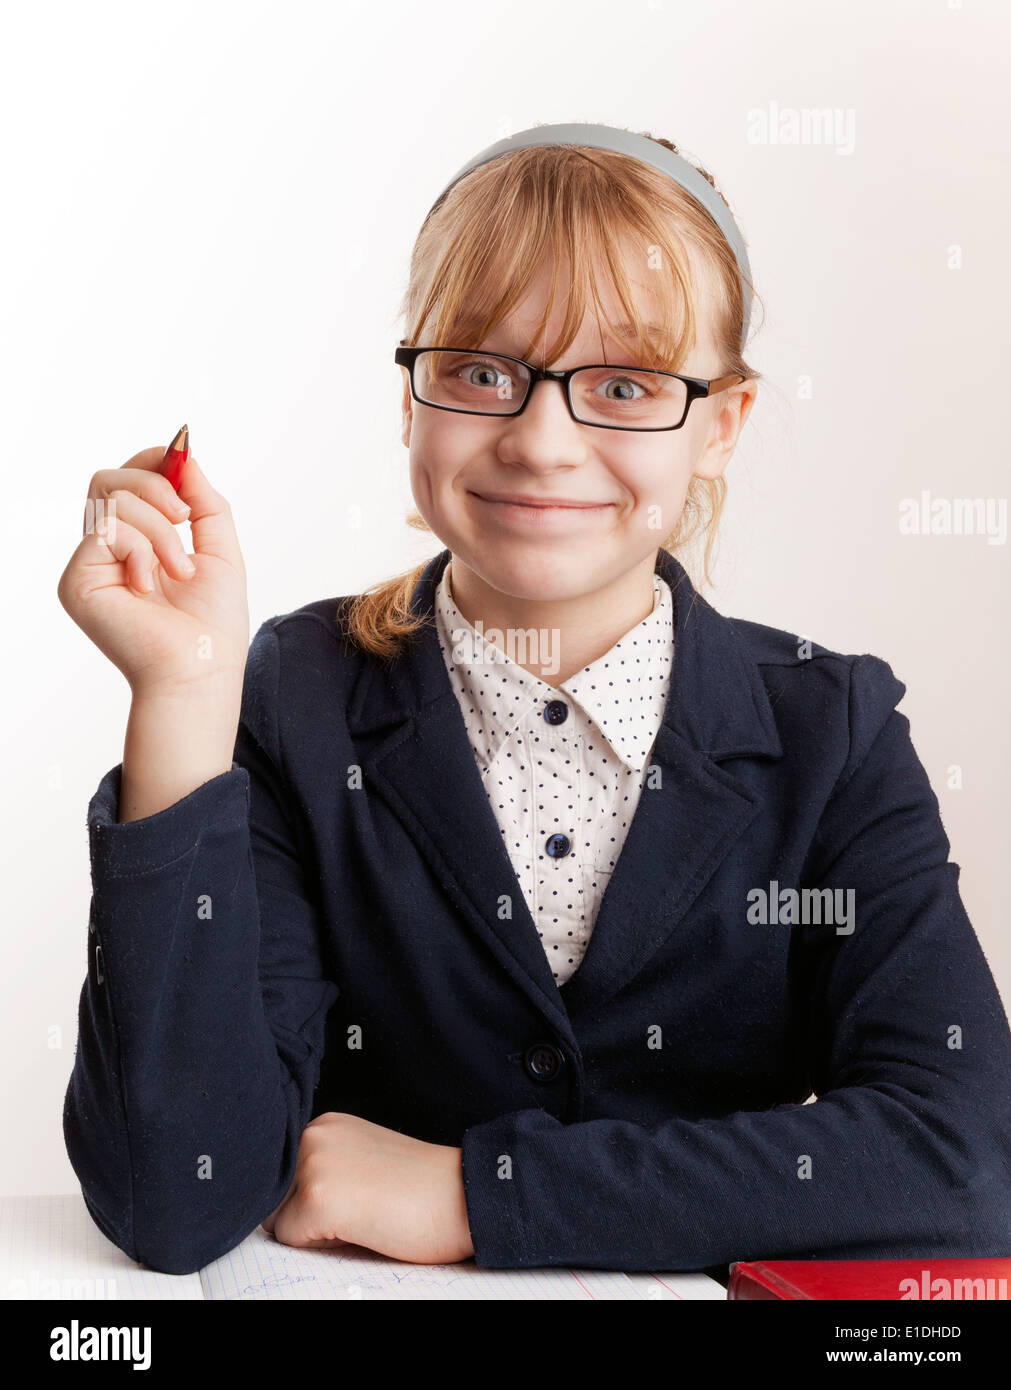 Little blond schoolgirl with glasses holds up the pen Stock Photo